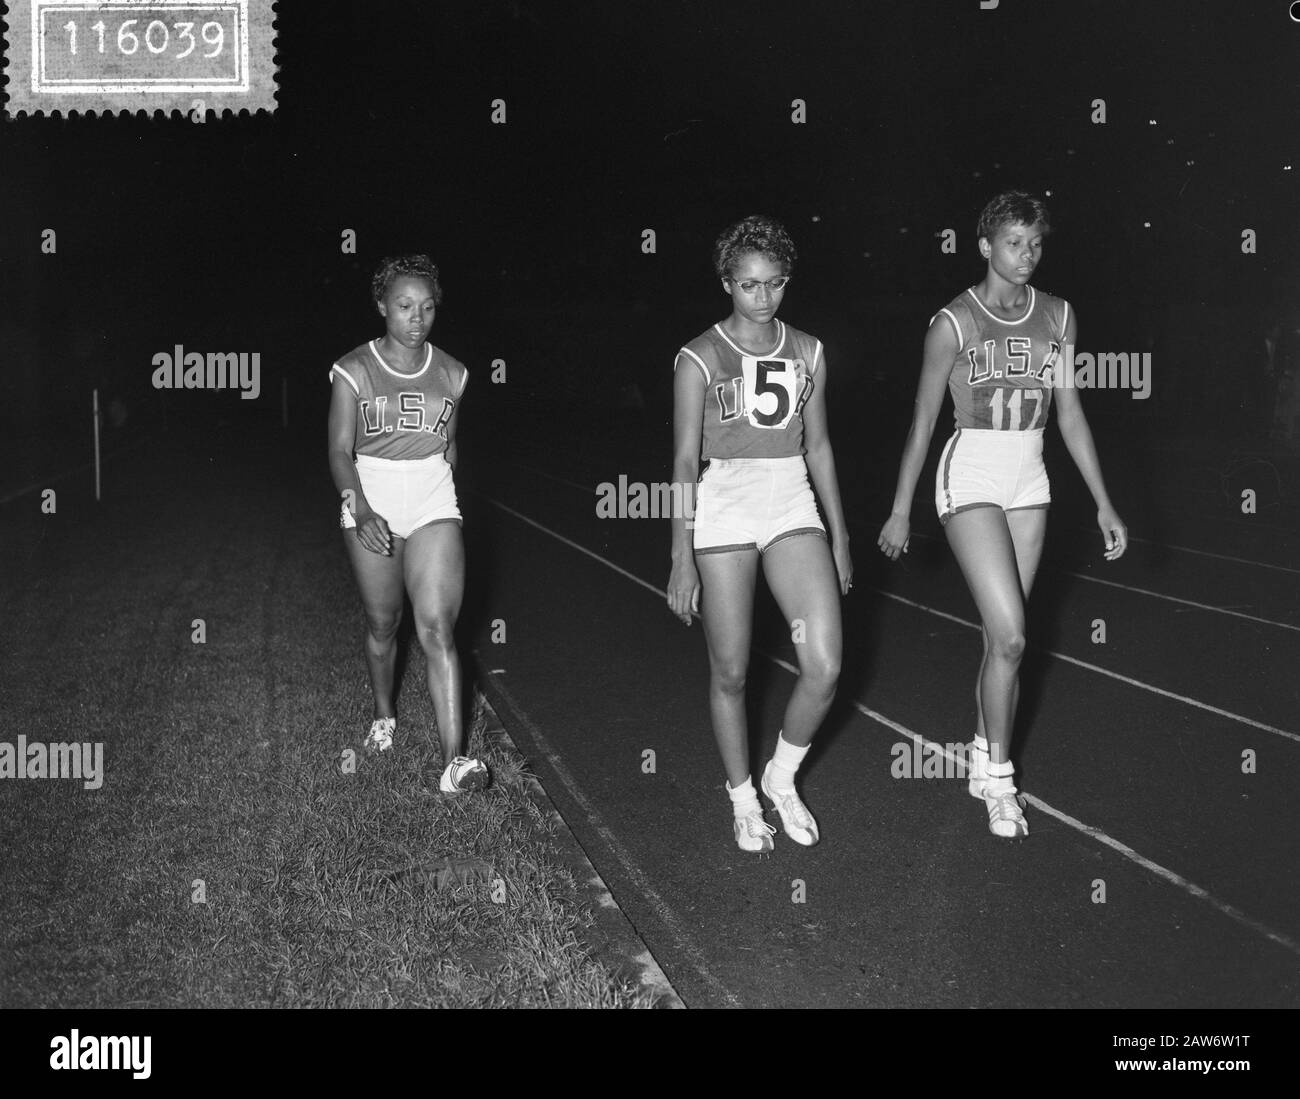 Olympic revances in stadium Amsterdam, Wilma Rudolph Date: September 15, 1960 Location: Amsterdam, Noord-Holland Keywords: athletics Person Name: Wilma Rudolph Stock Photo